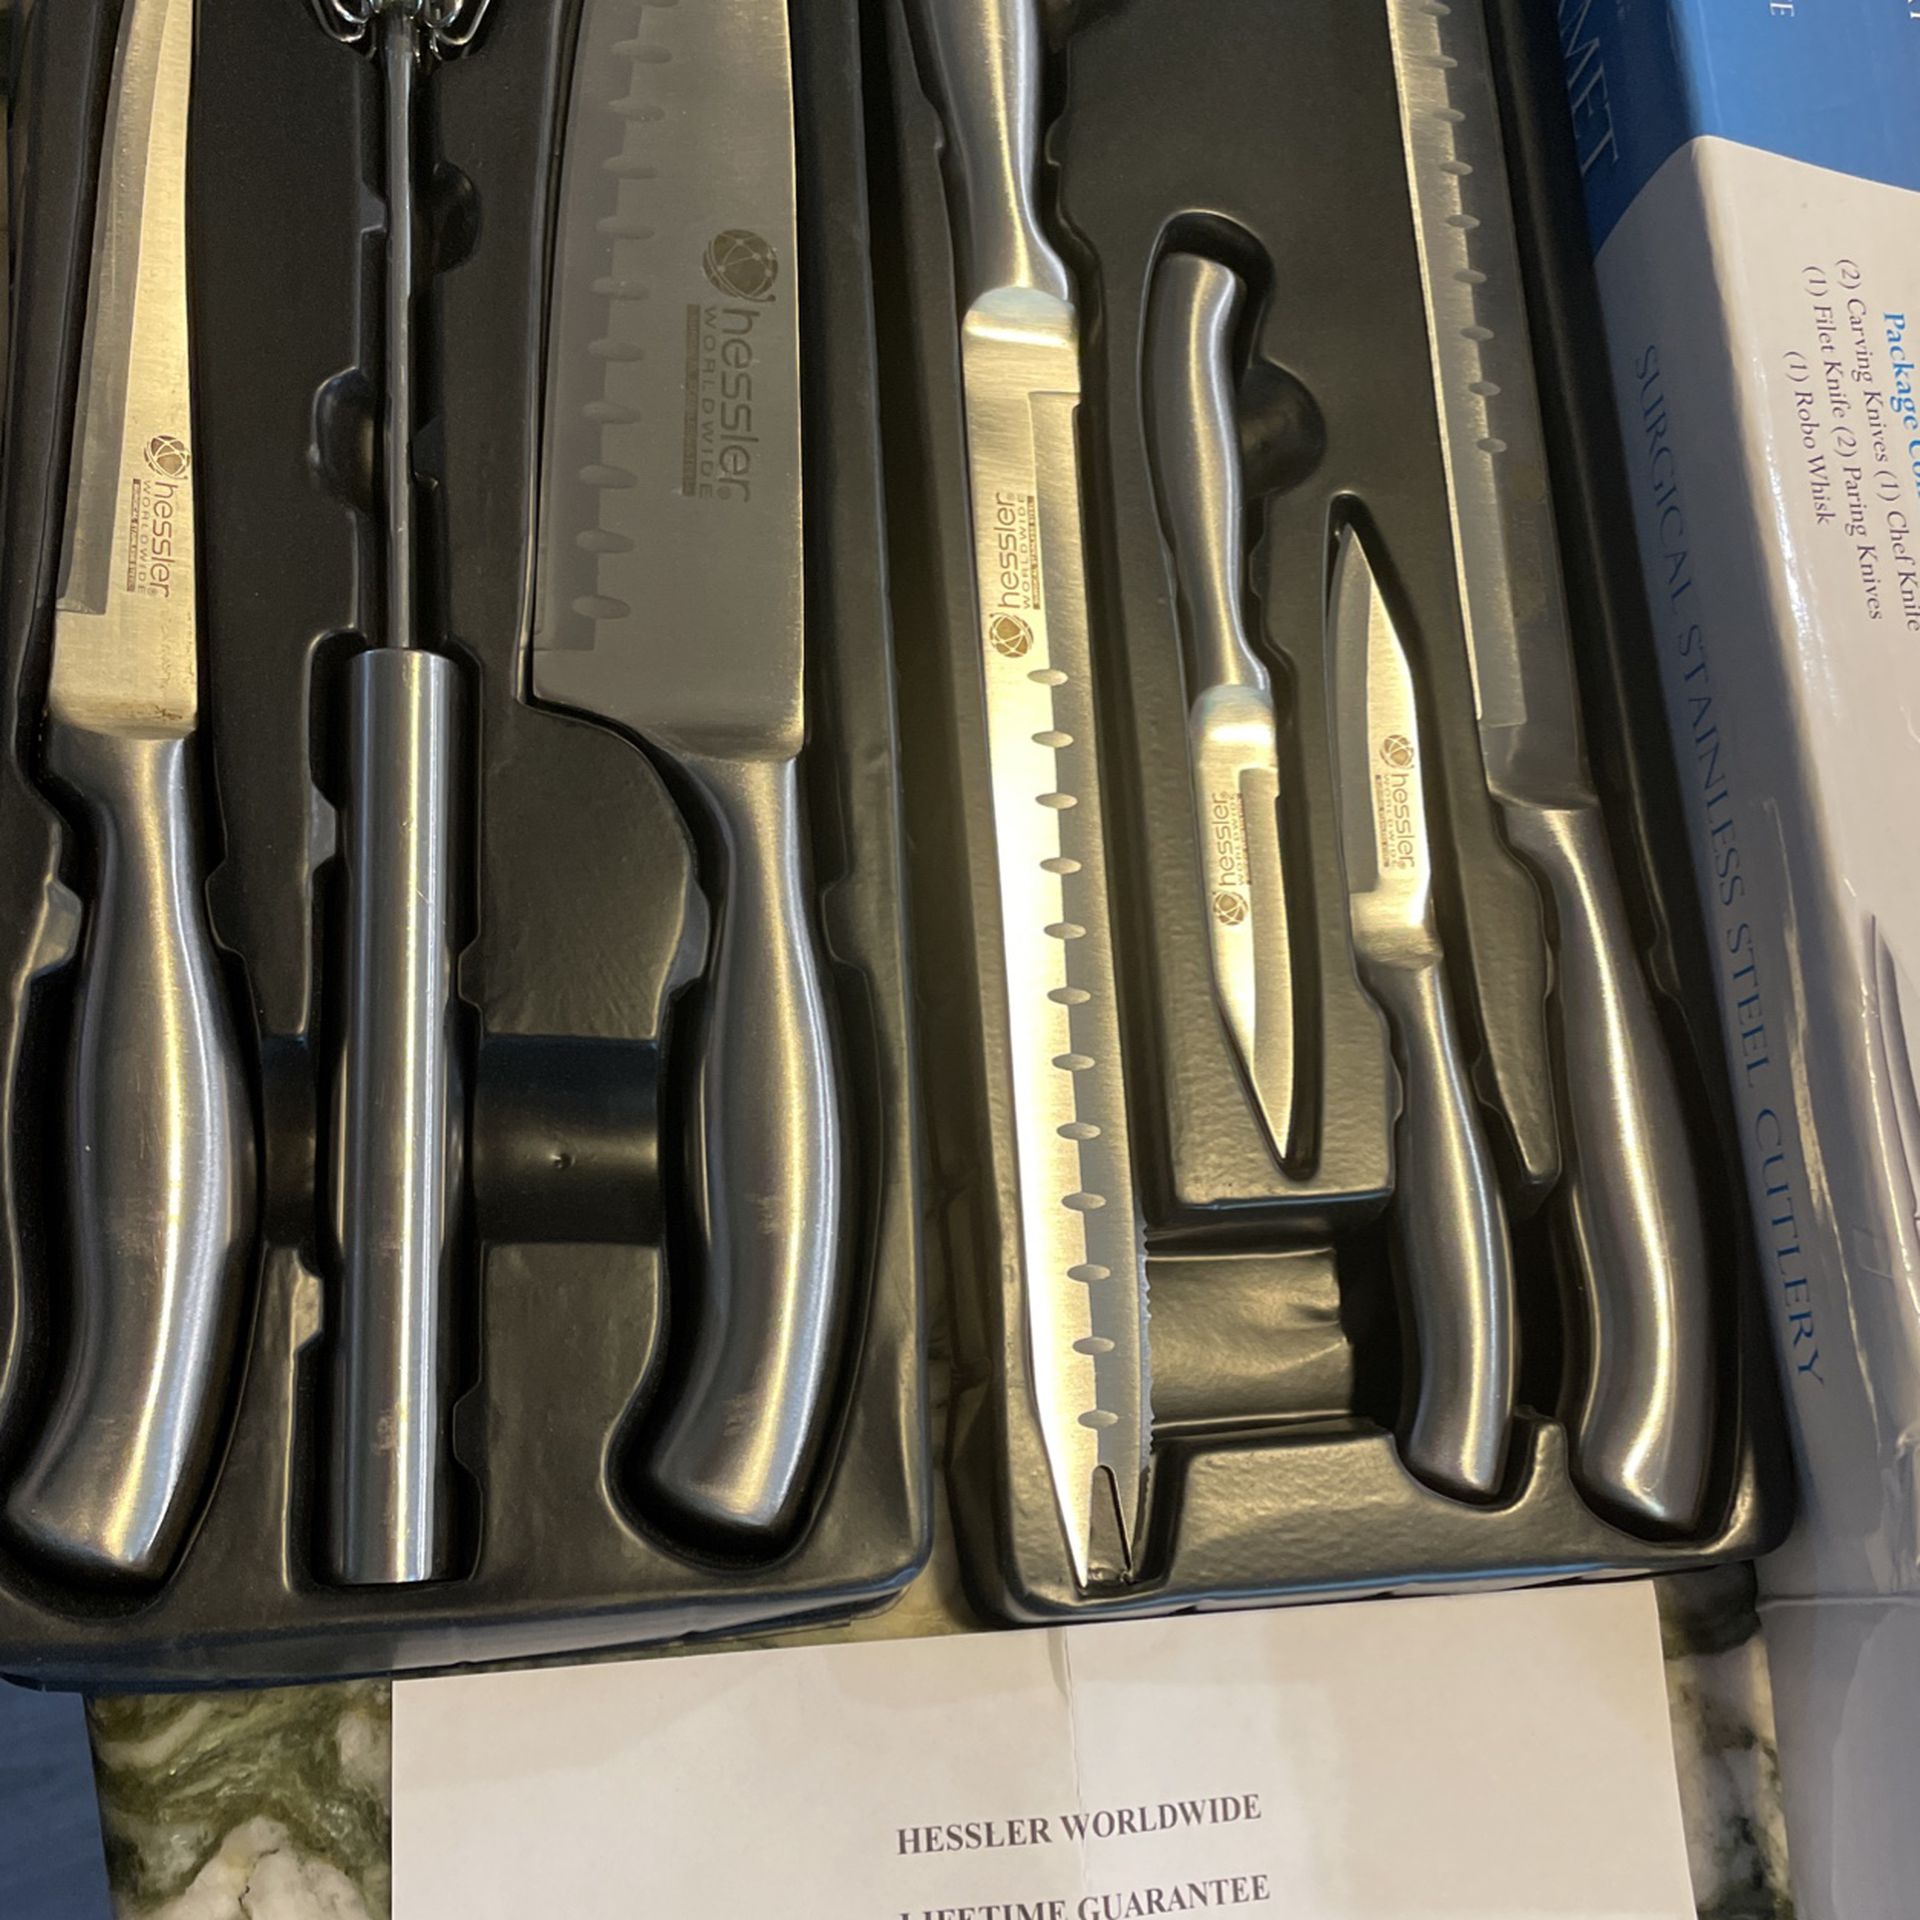 Hessler Chef Series Surgical Stainless Steel Cutlery 7 Piece Knife Set